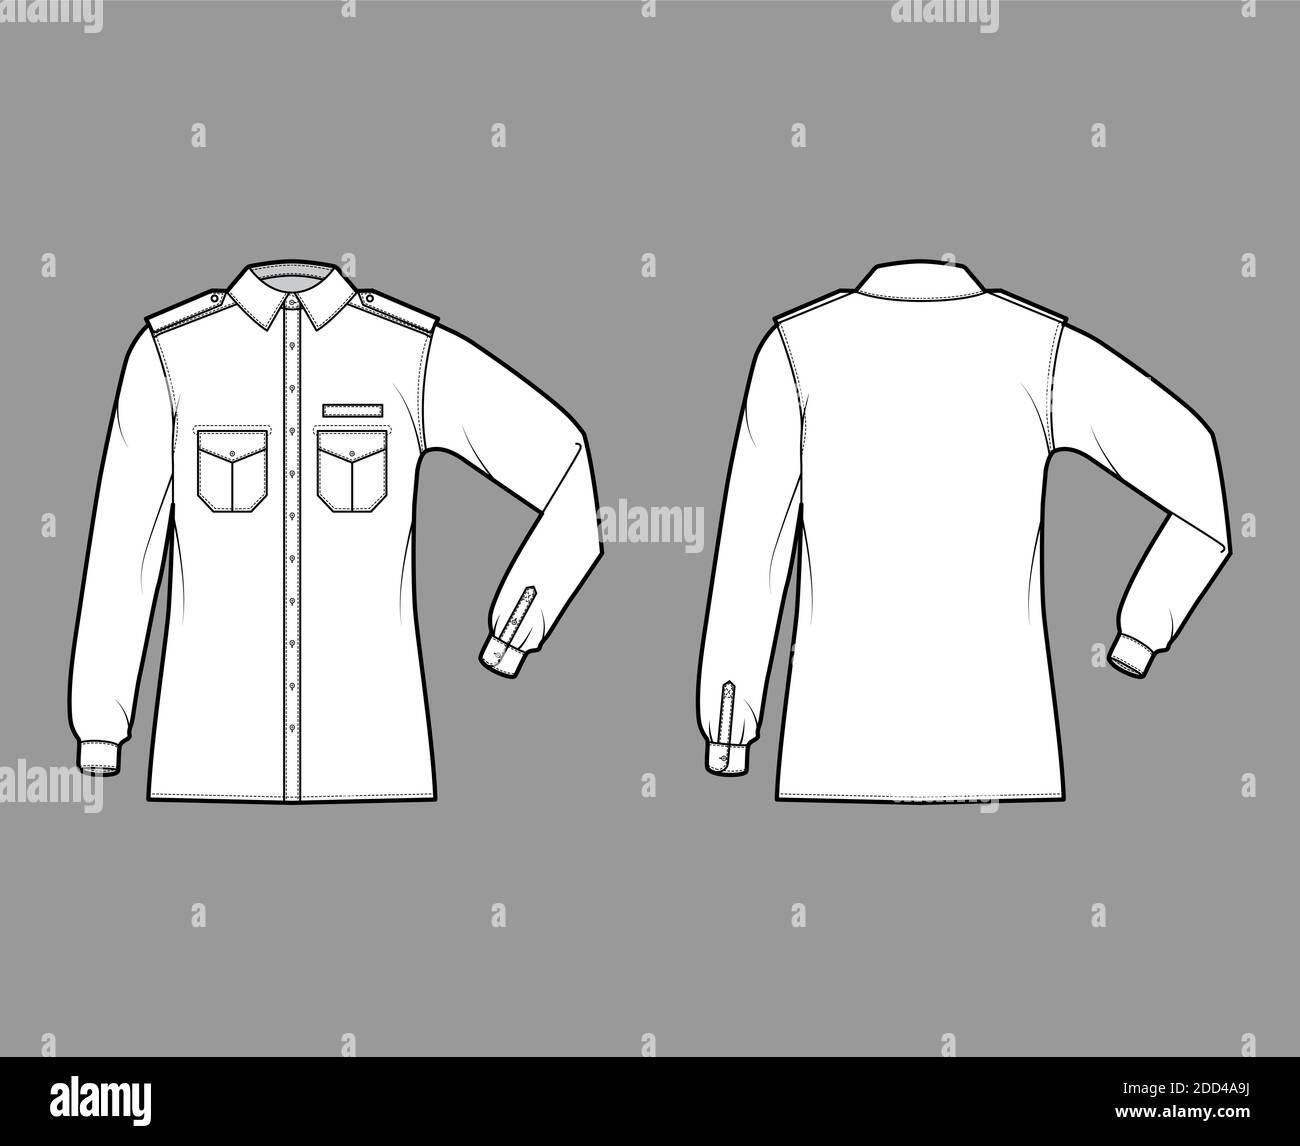 Shirt military technical fashion illustration with epaulette, flaps angled pockets, elbow fold long sleeve, relax fit, button-down. Flat template front, back white color. Women men unisex top CAD Stock Vector